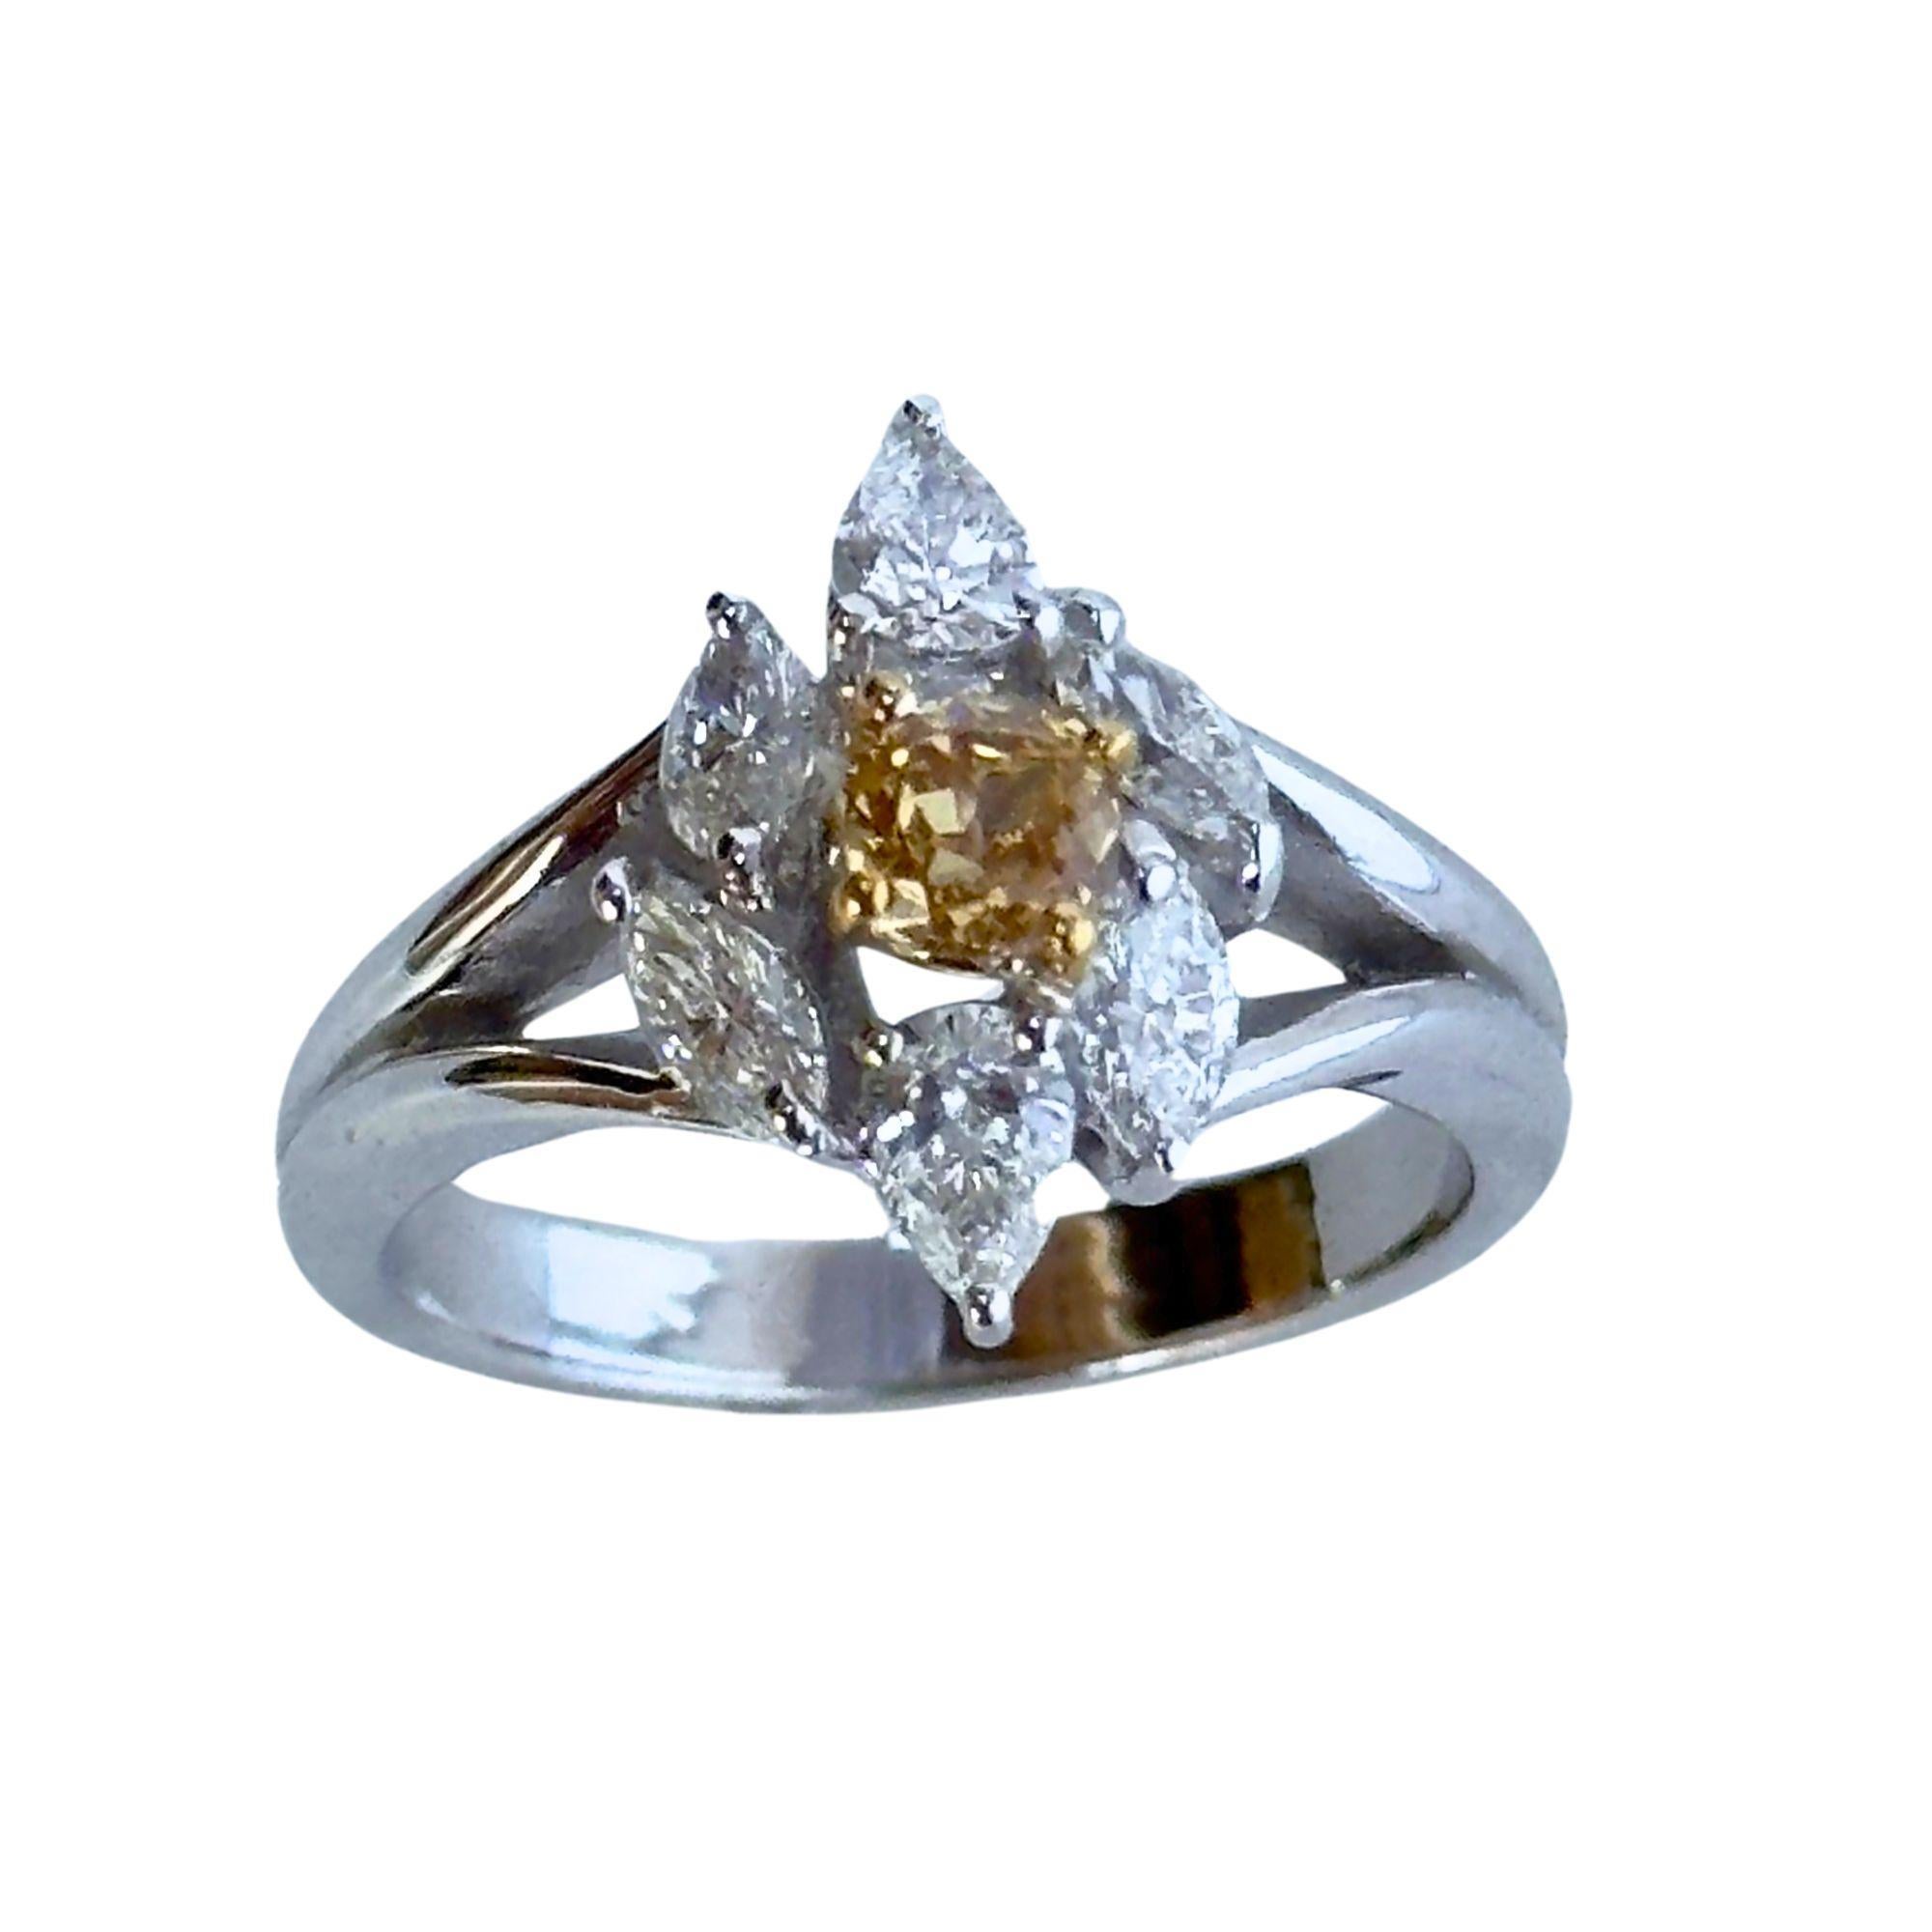 Introducing our exquisite 18k White and Yellow Diamond Ring. Weighing 5.7 grams and featuring a size 6 ring, this captivating piece showcases a brilliant 0.81-carat yellow diamond at its center, complemented by surrounding white diamonds for a total